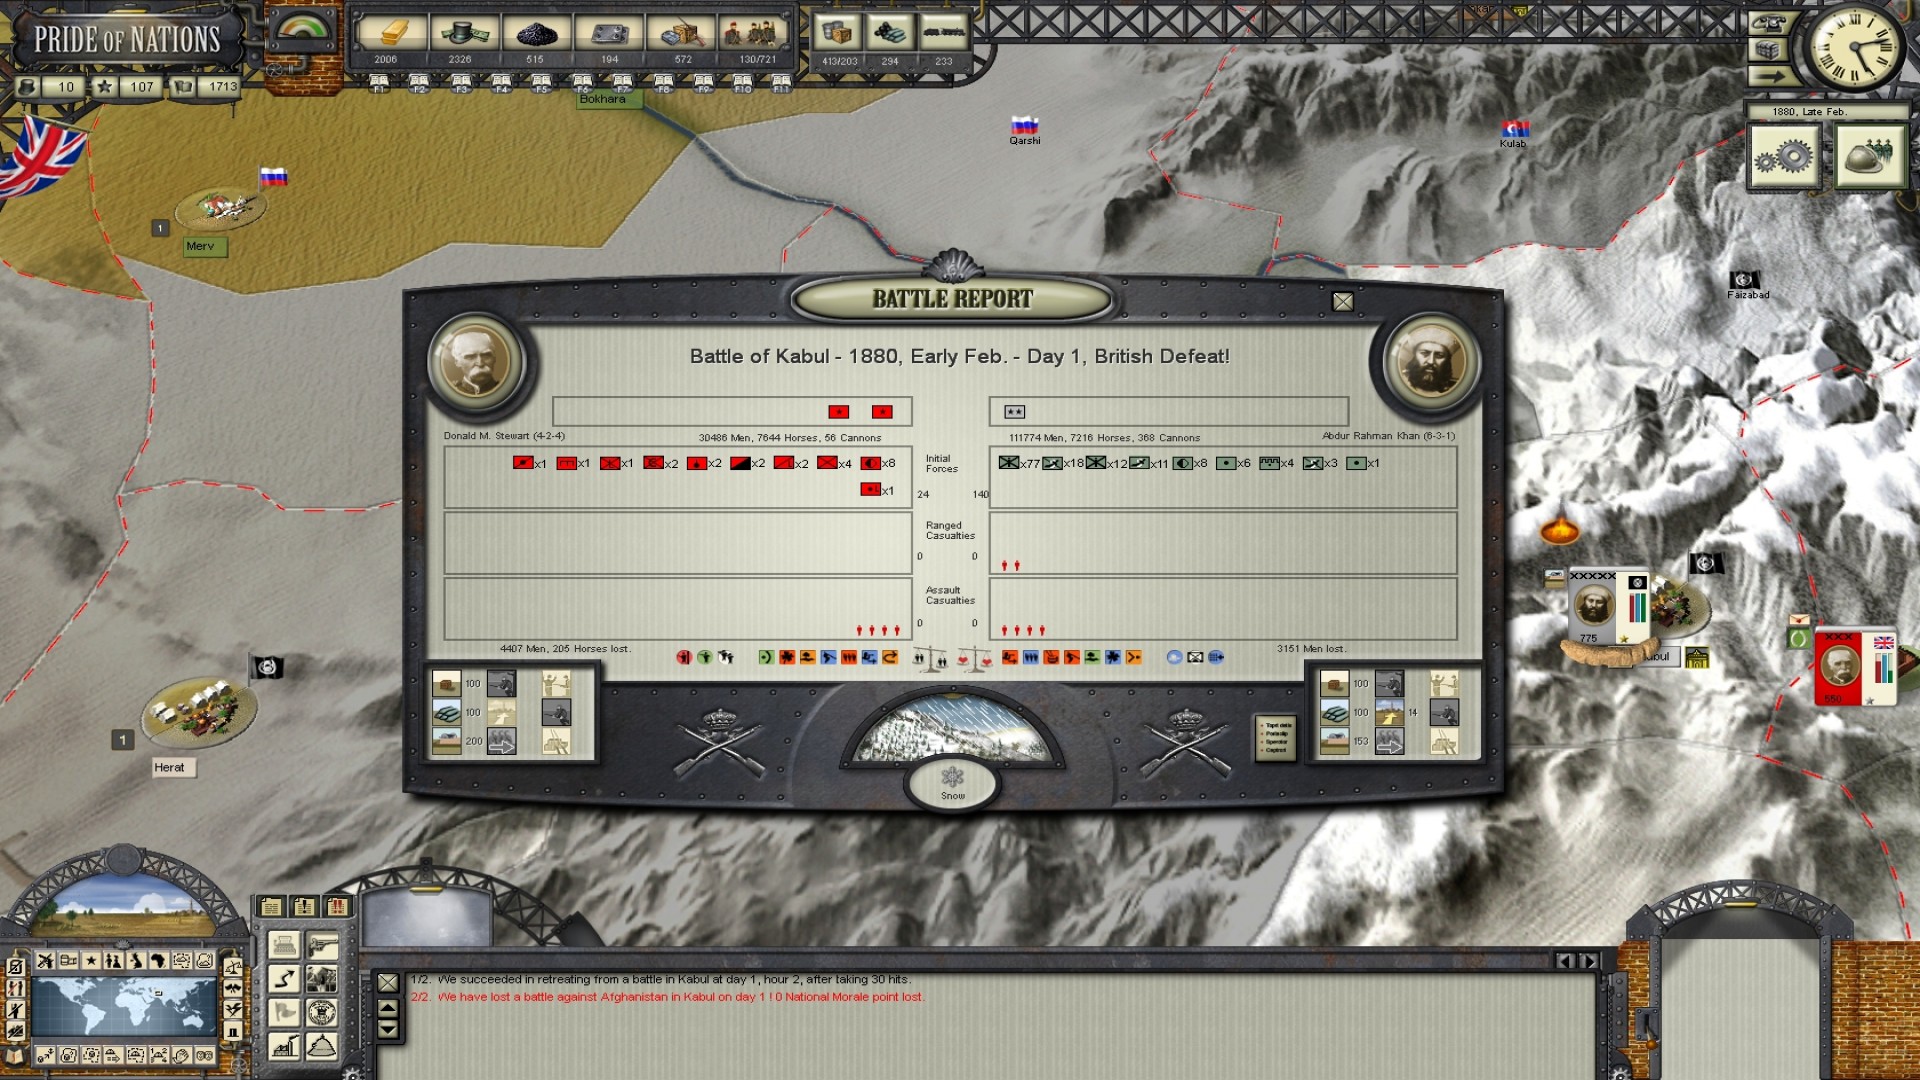 Pride of Nations: The Scramble for Africa screenshot